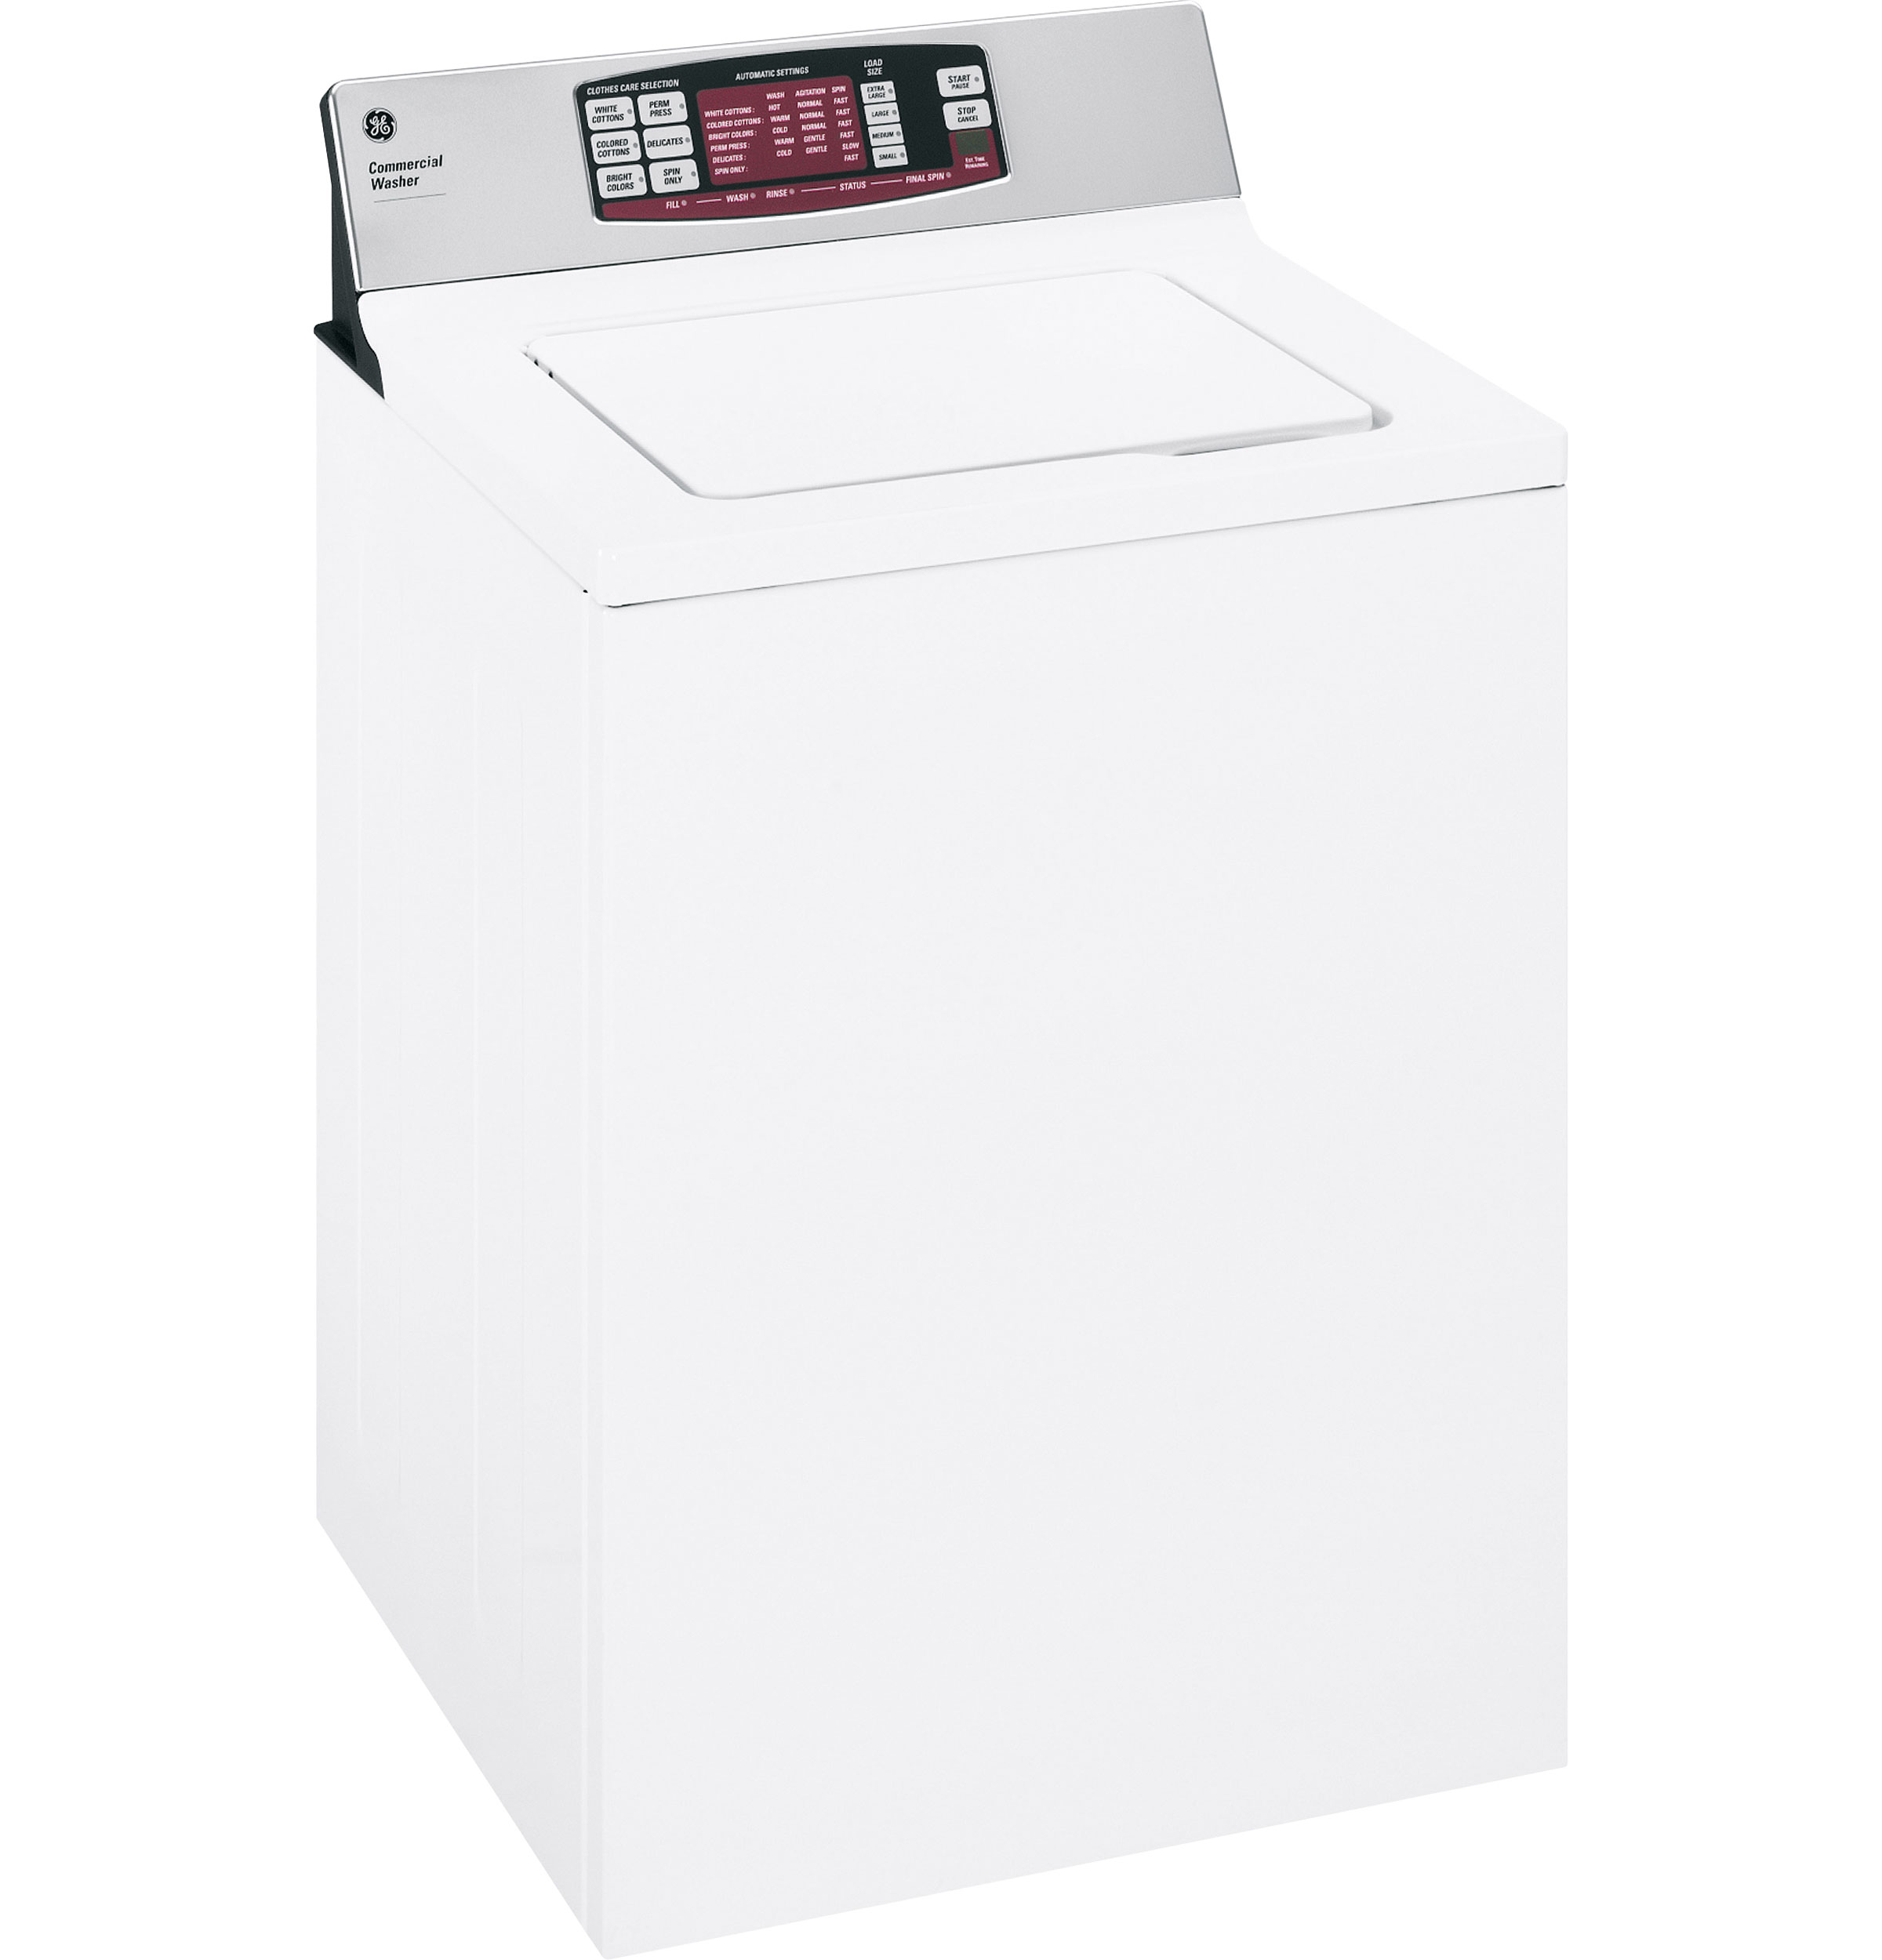 GE® 3.5 Cu. Ft. Capacity Commercial Washer with Stainless Steel Basket